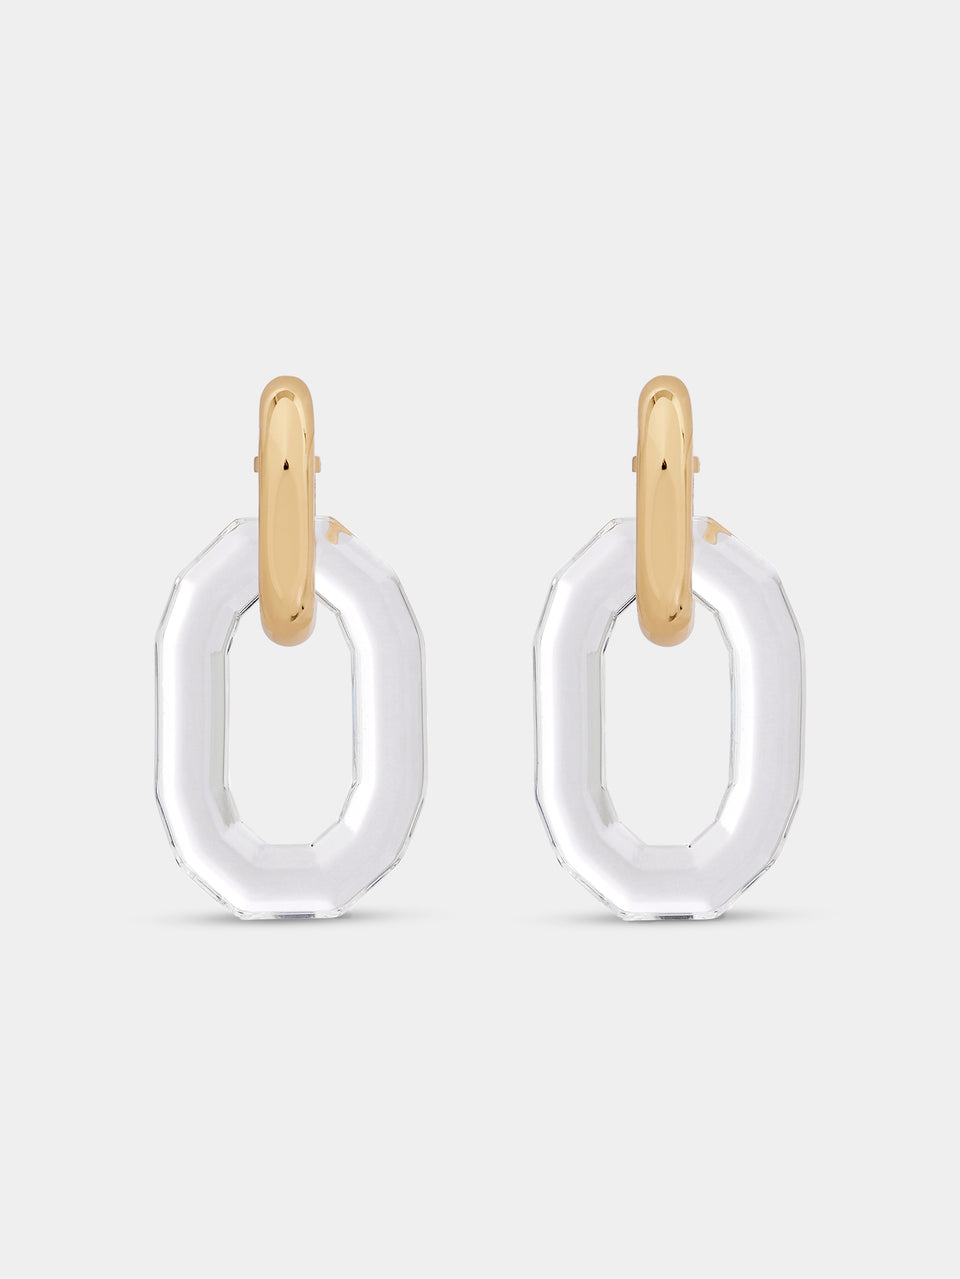 Gold and transparent XL link earrings